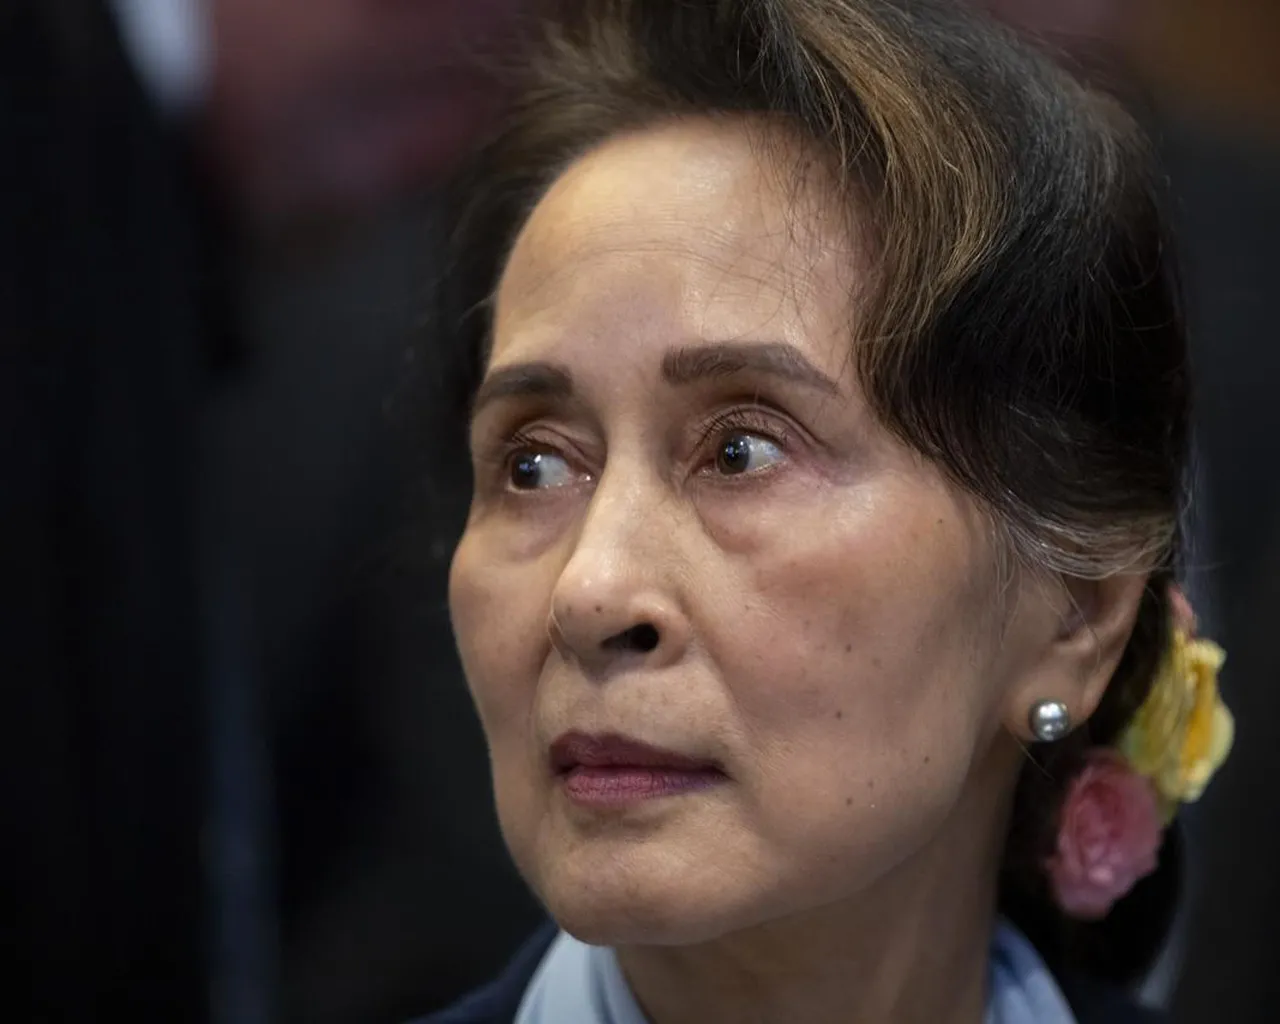 Myanmar court convicts Suu Kyi of vote fraud, adds jail time